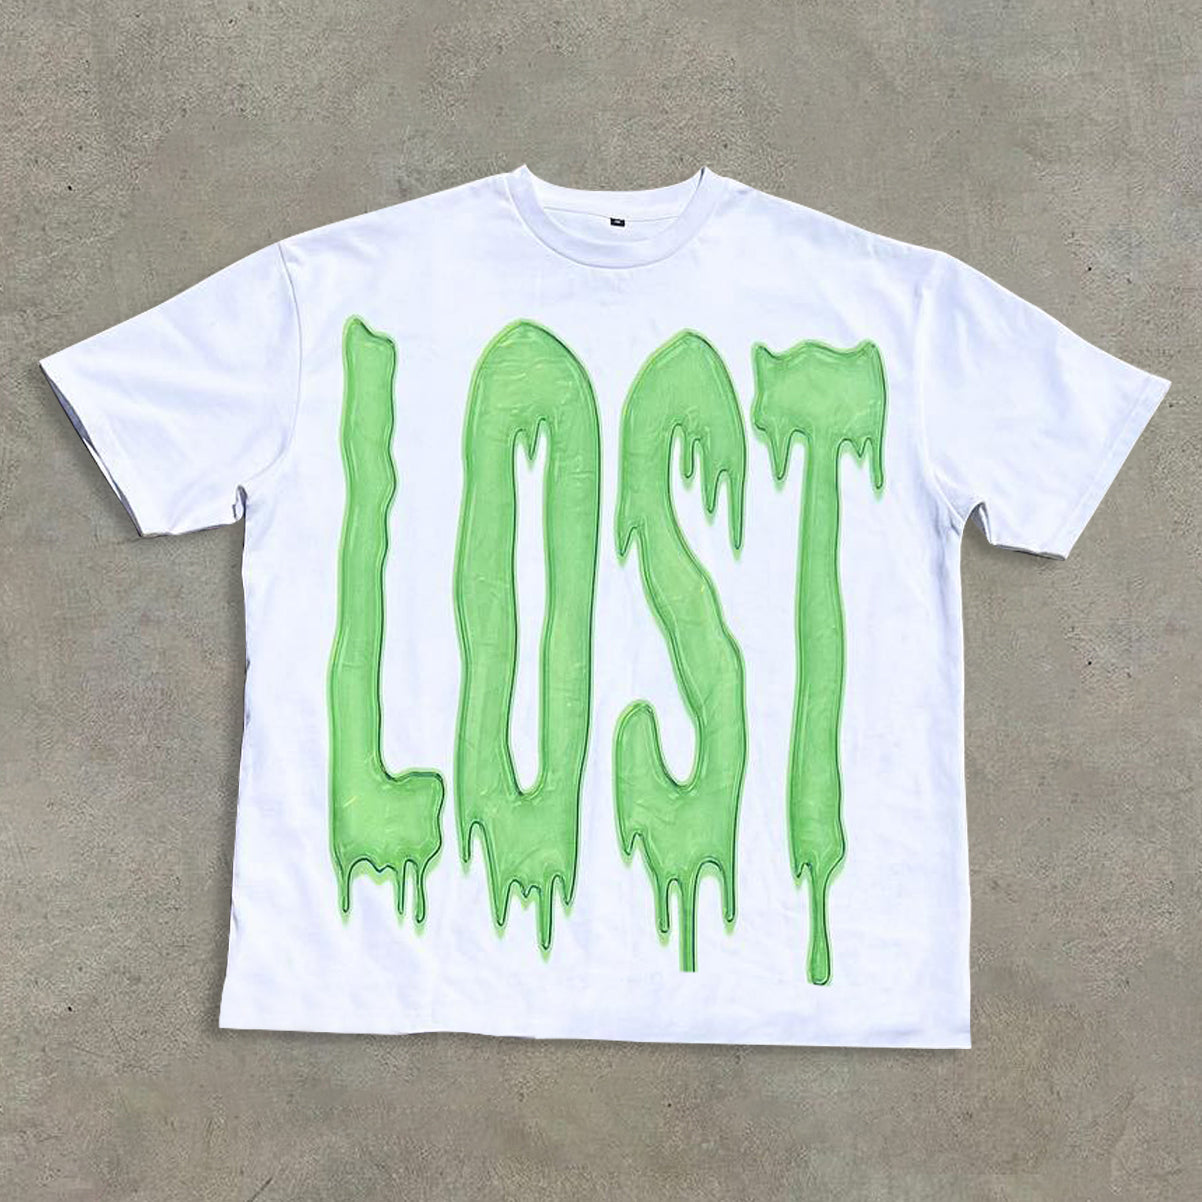 Fashionable personalized lost printed T-shirt